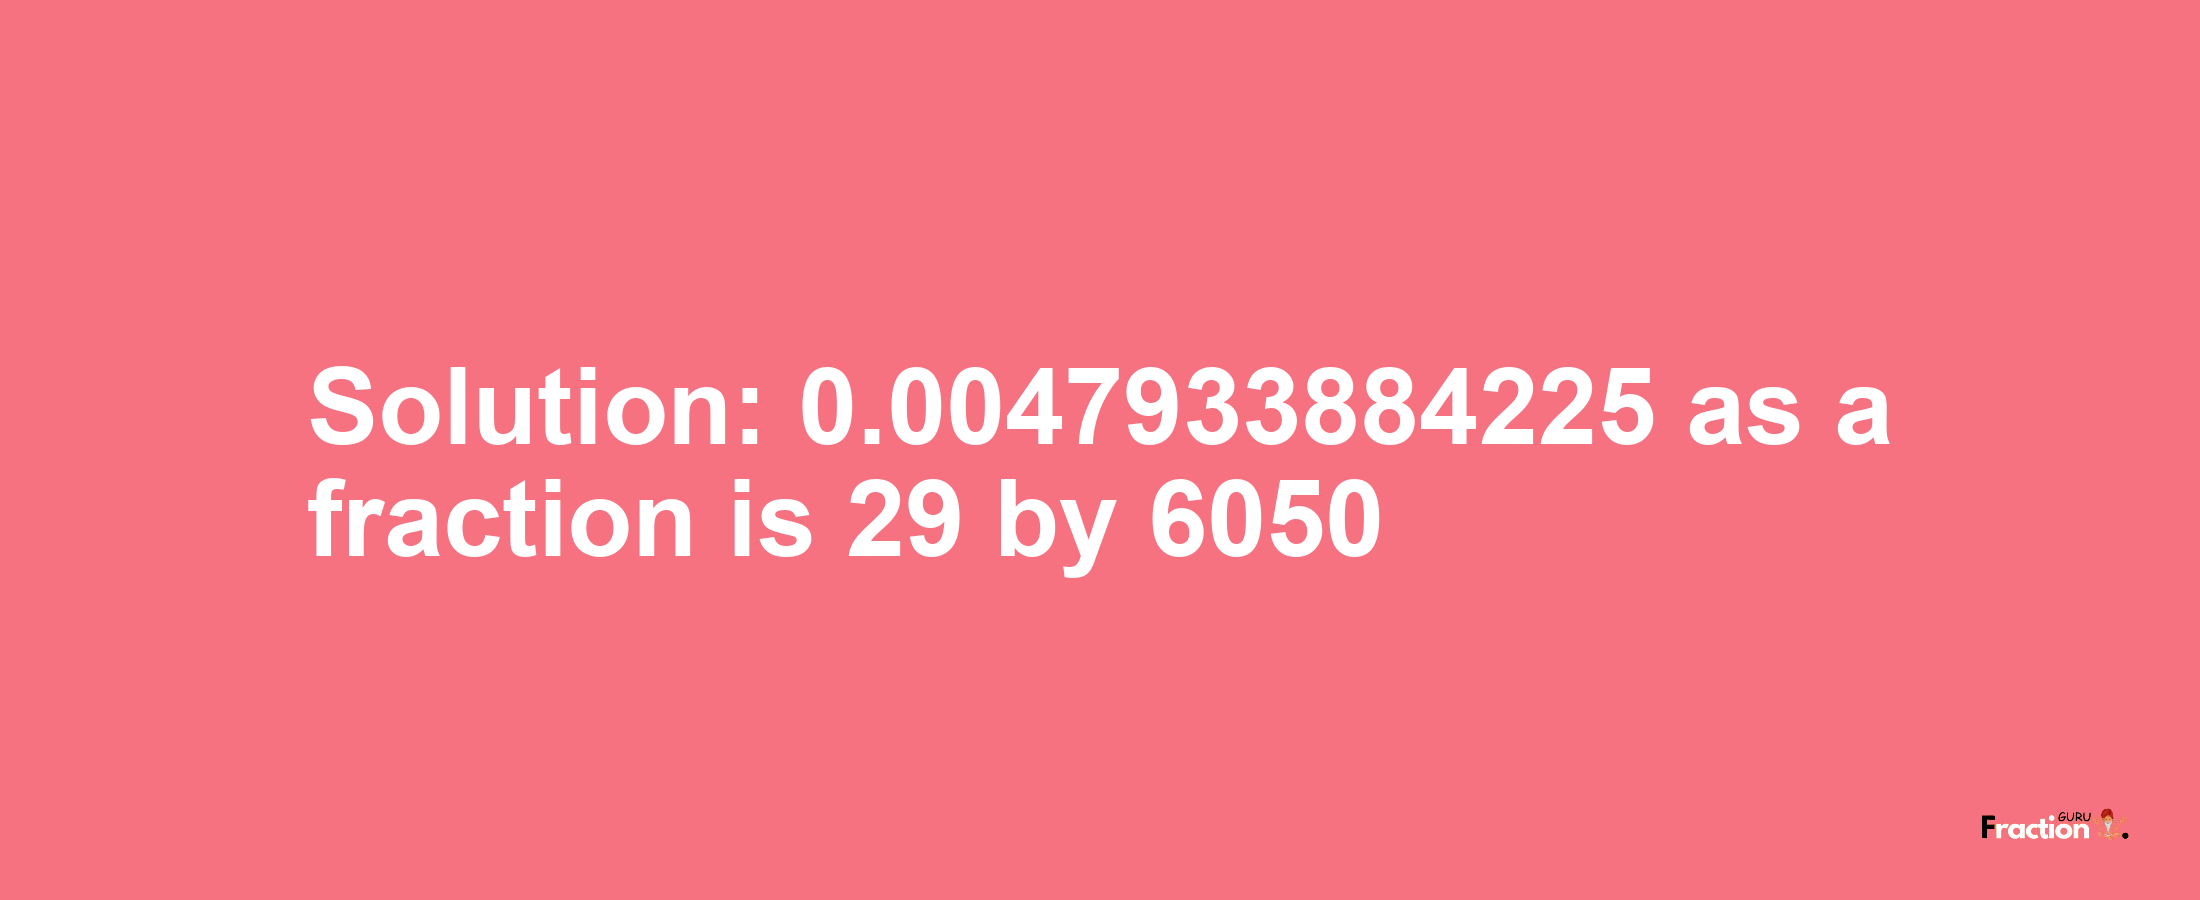 Solution:0.0047933884225 as a fraction is 29/6050